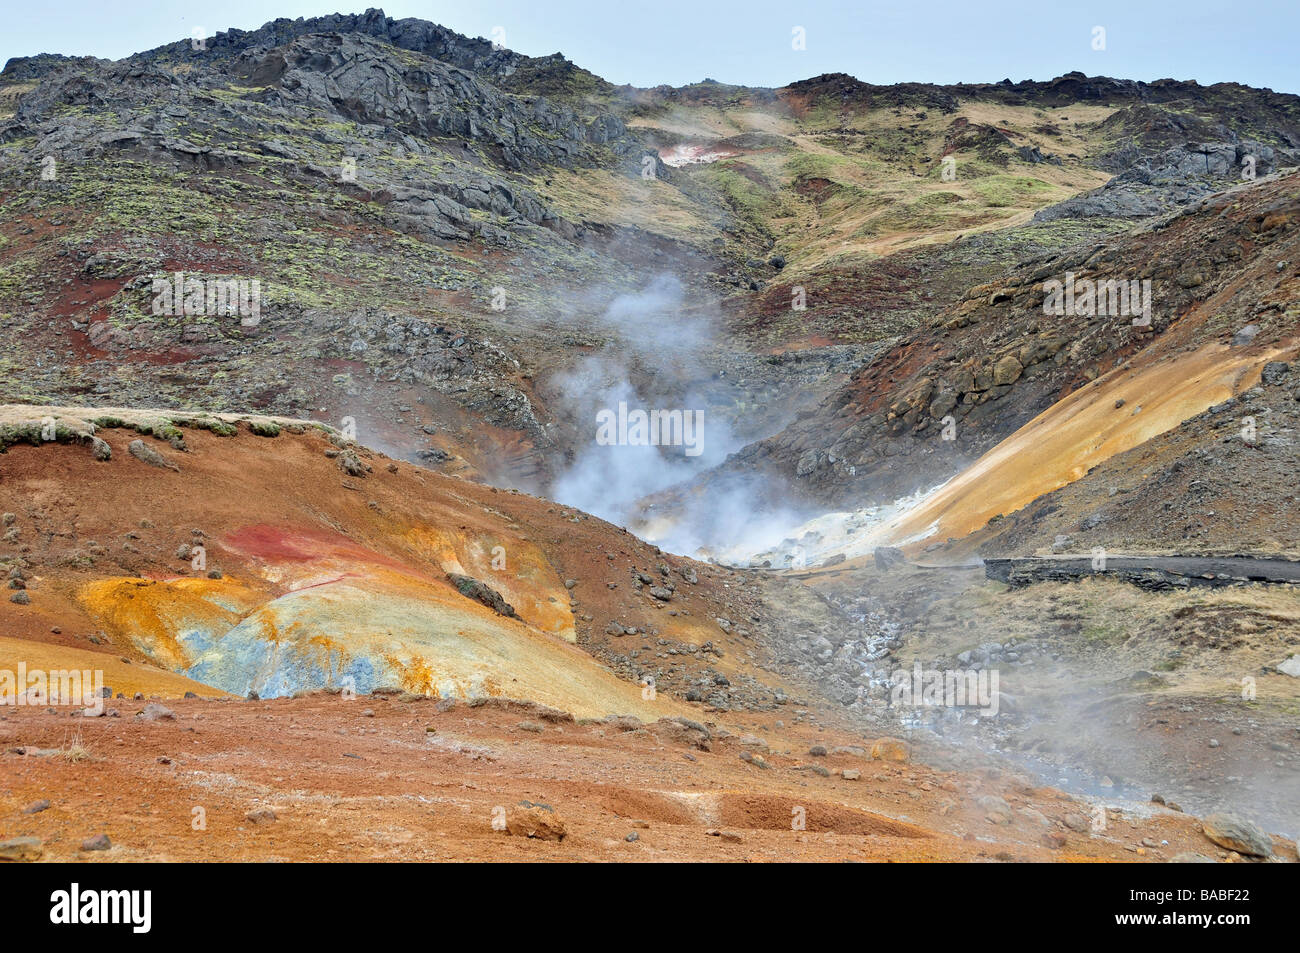 Steaming solfataras and colourful clay soils in the Krisuvik High Temperature Geothermal Area, South West Iceland Stock Photo